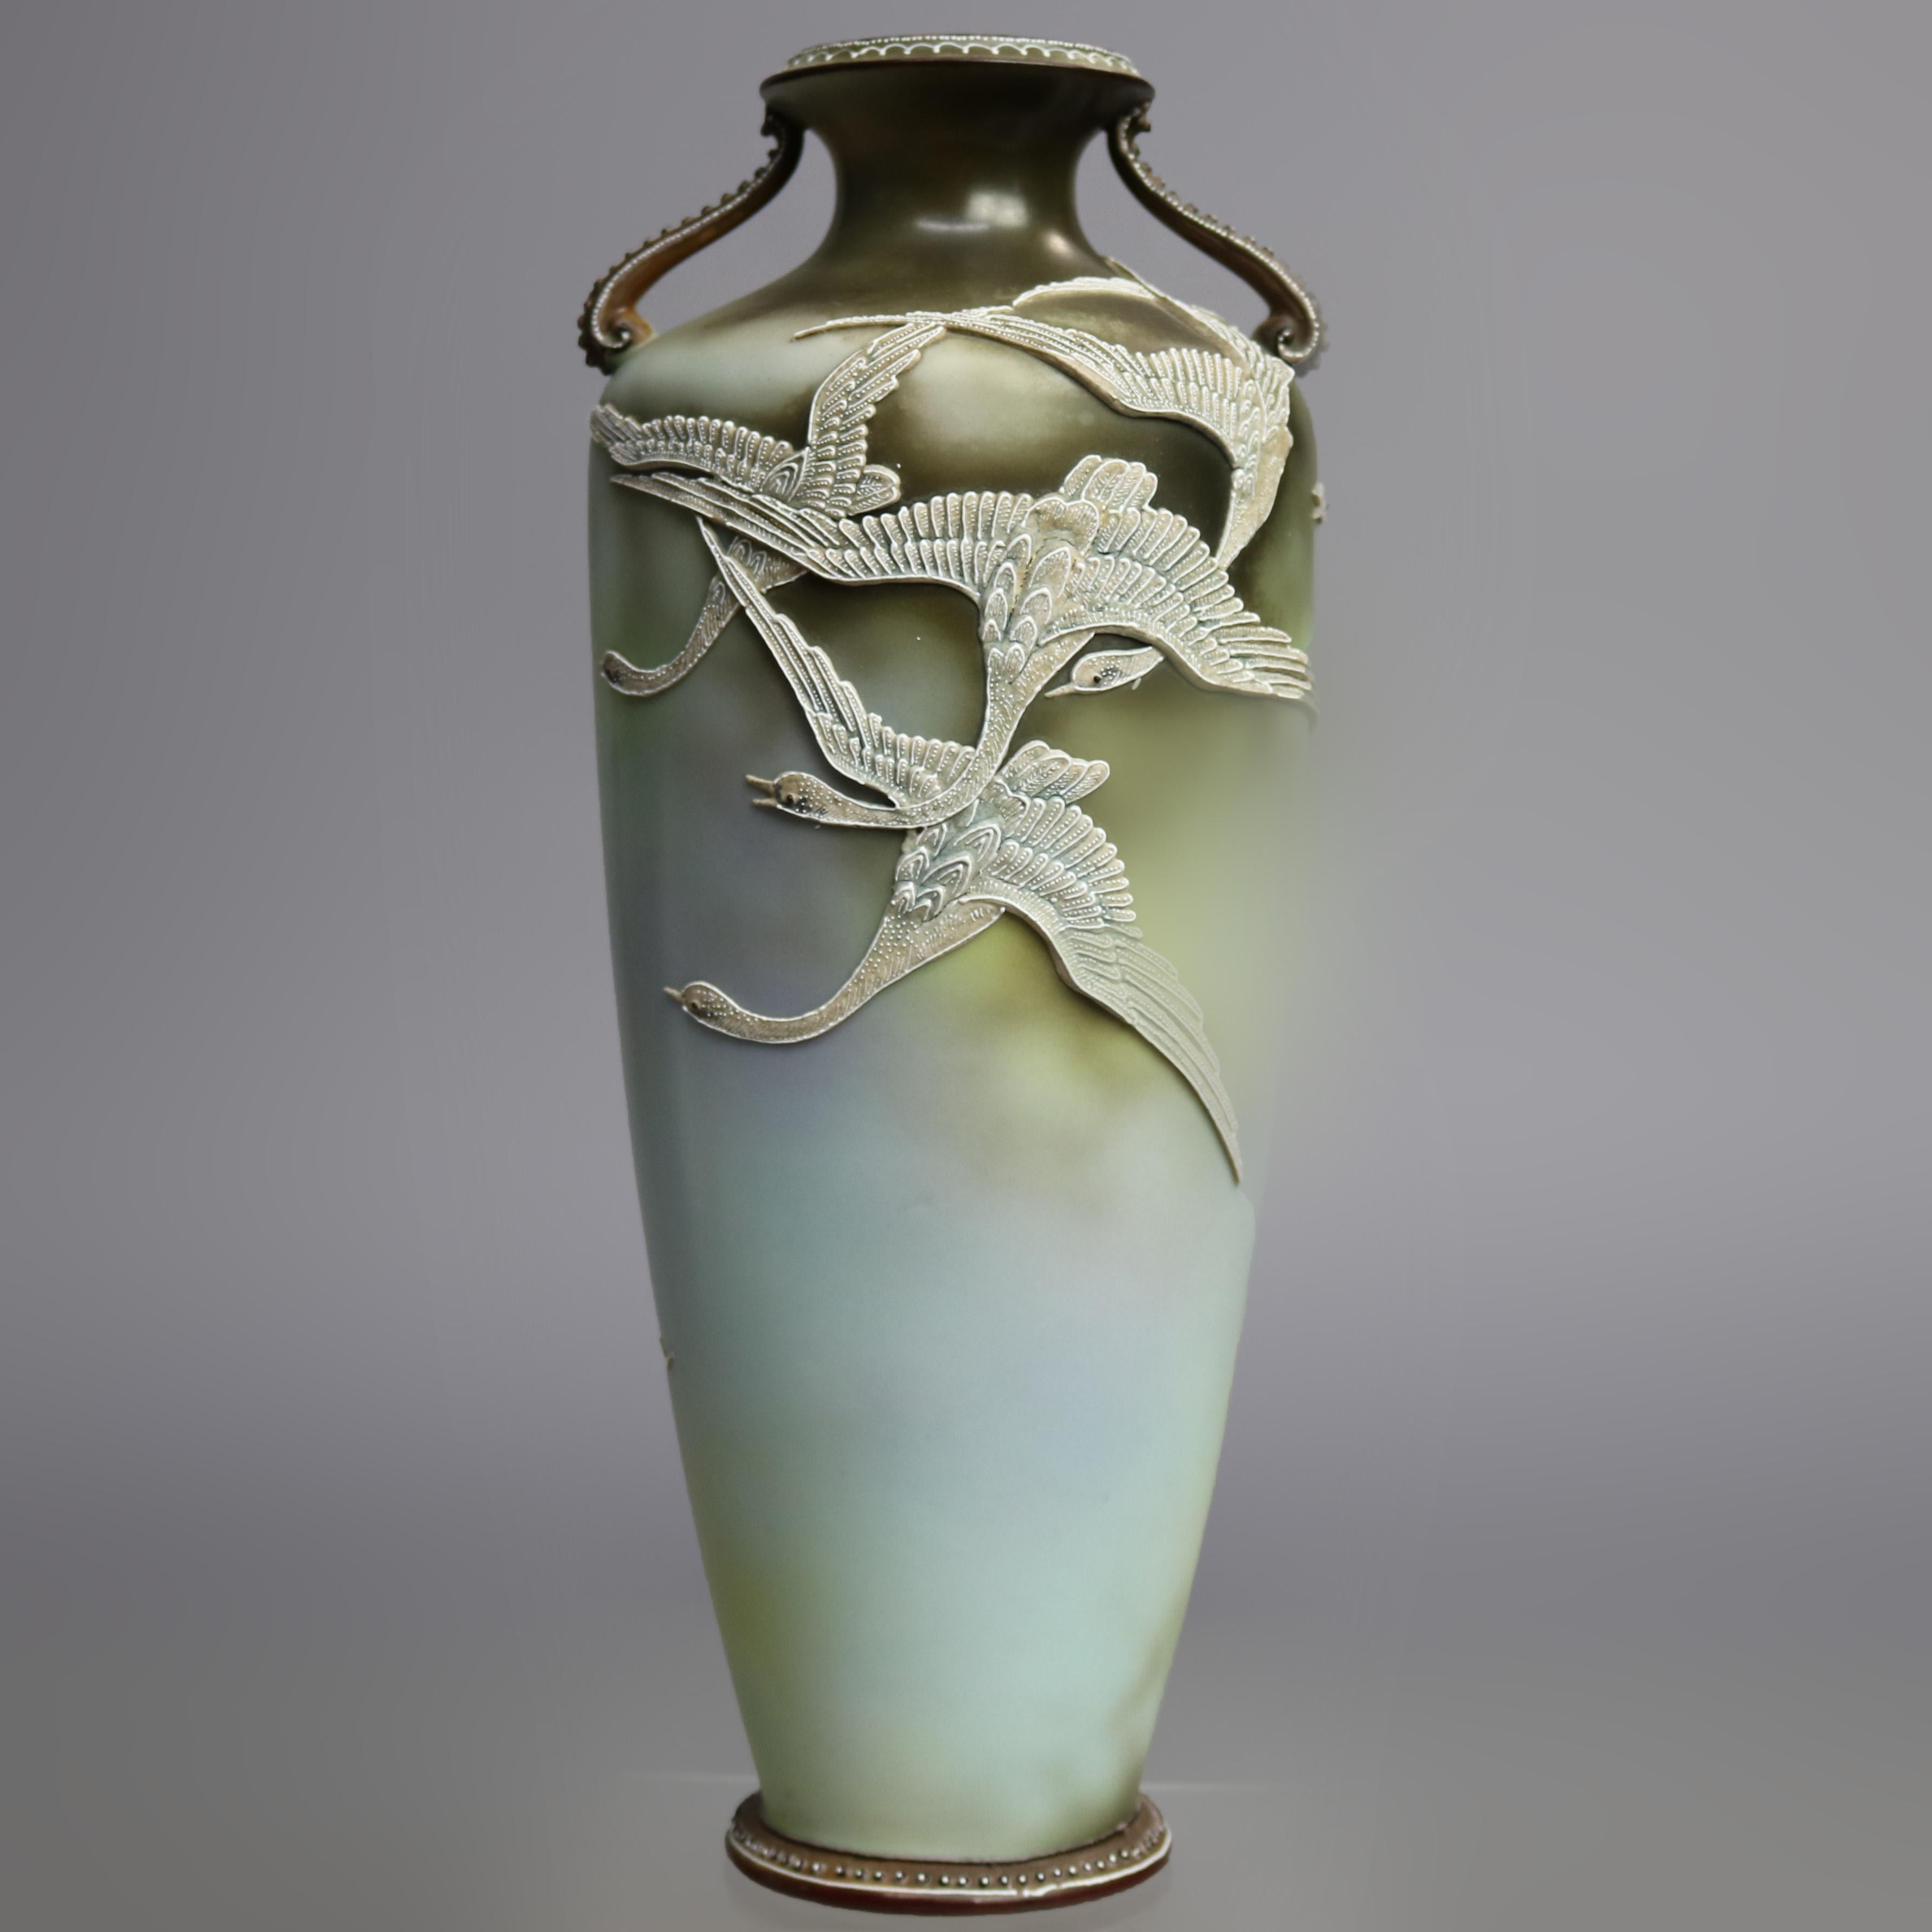 Hand-Painted Antique Art Nouveau Japanese Nippon Moriage Porcelain Urn Vase with Geese